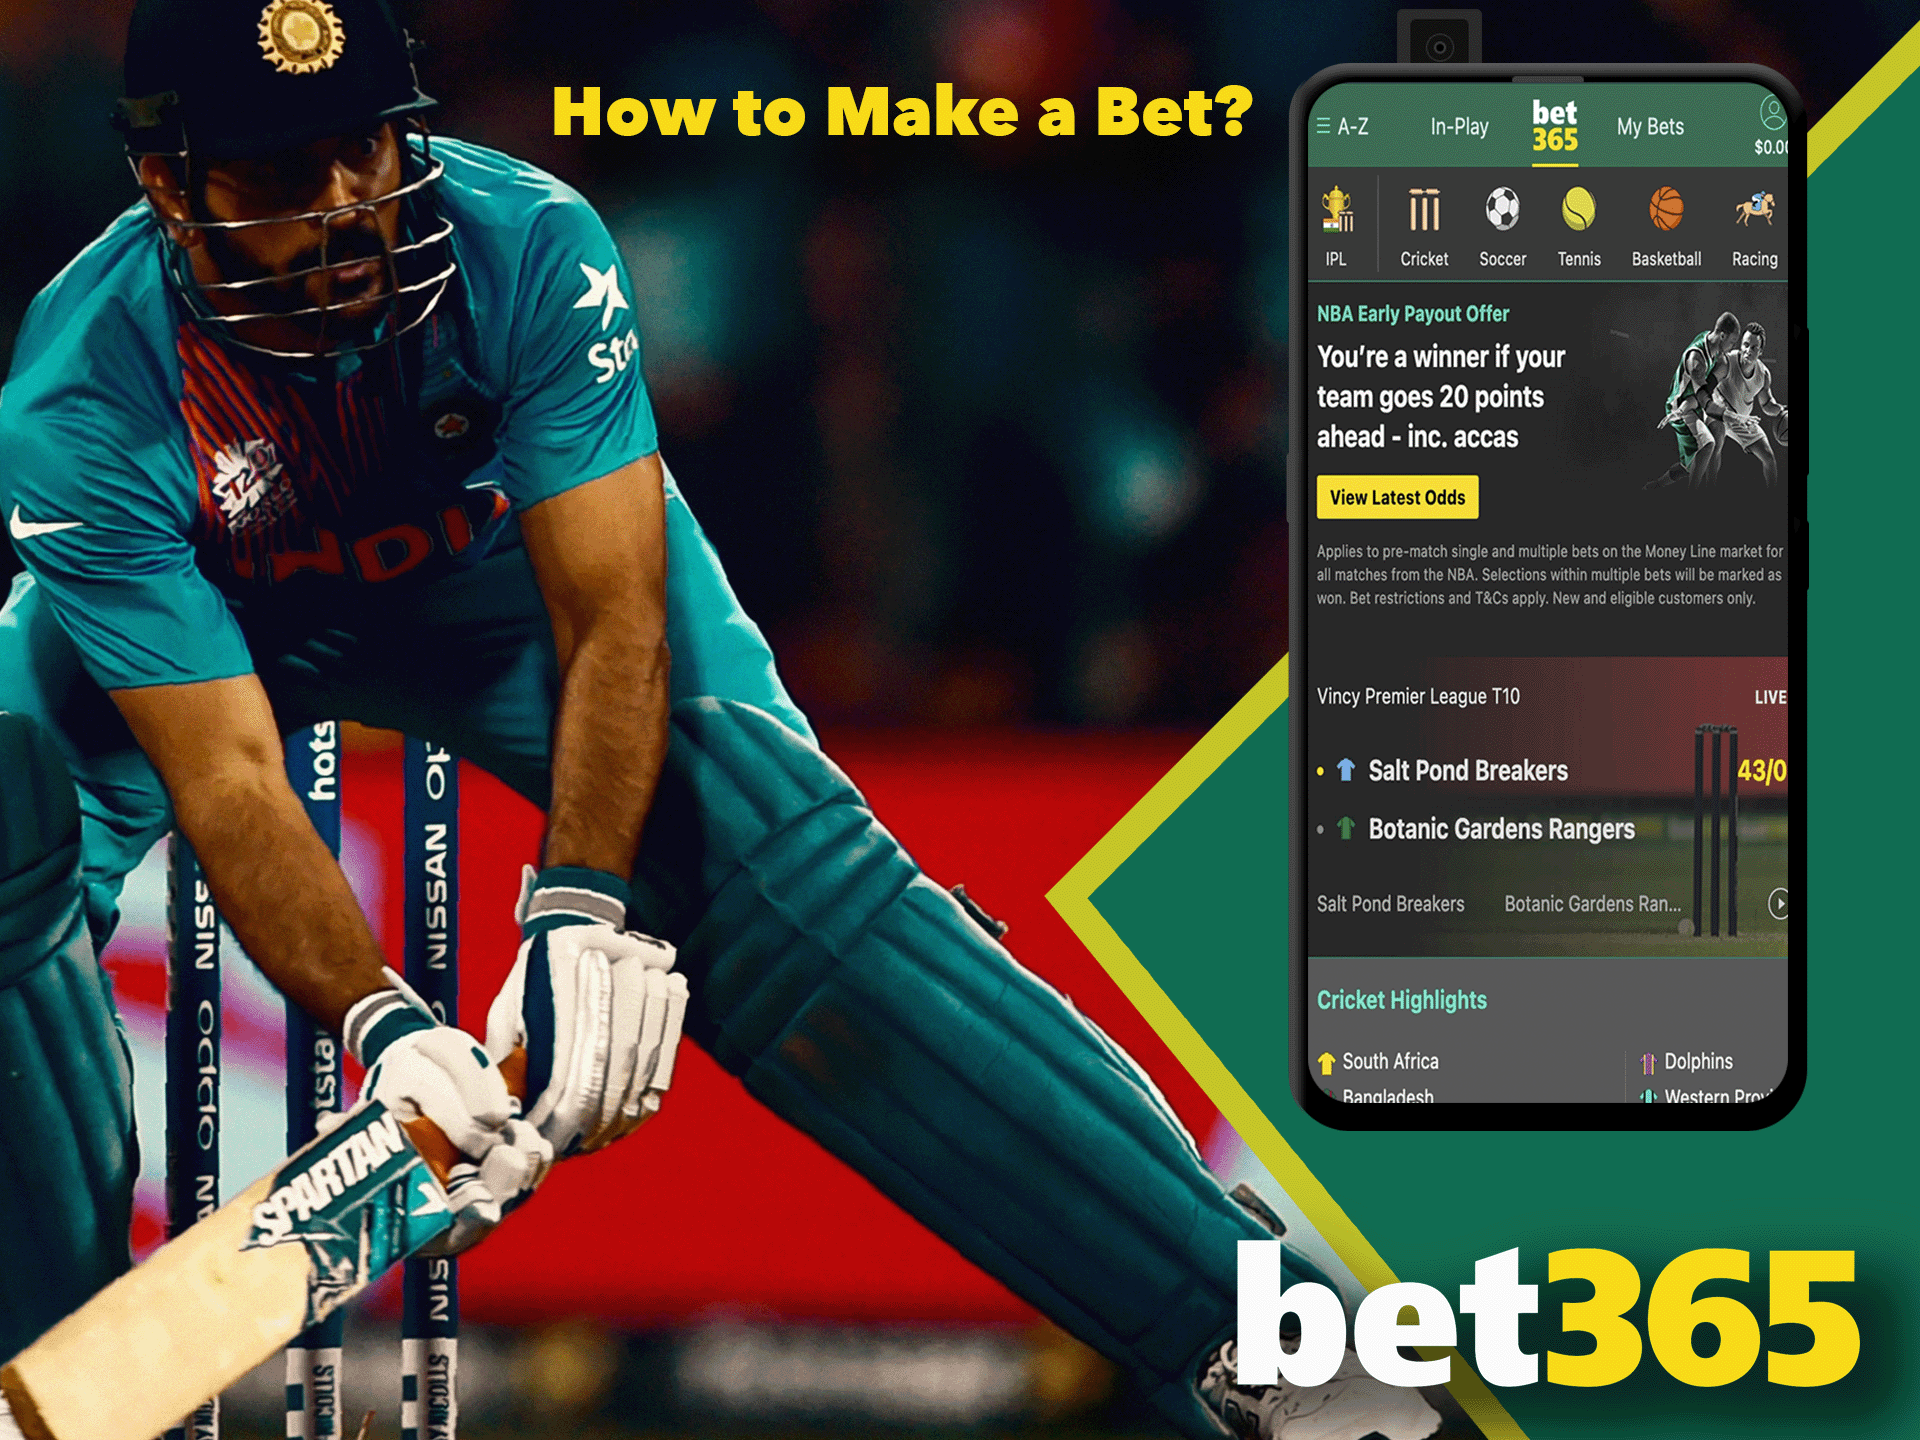 Our instruction will help you place a bet at Bet365.